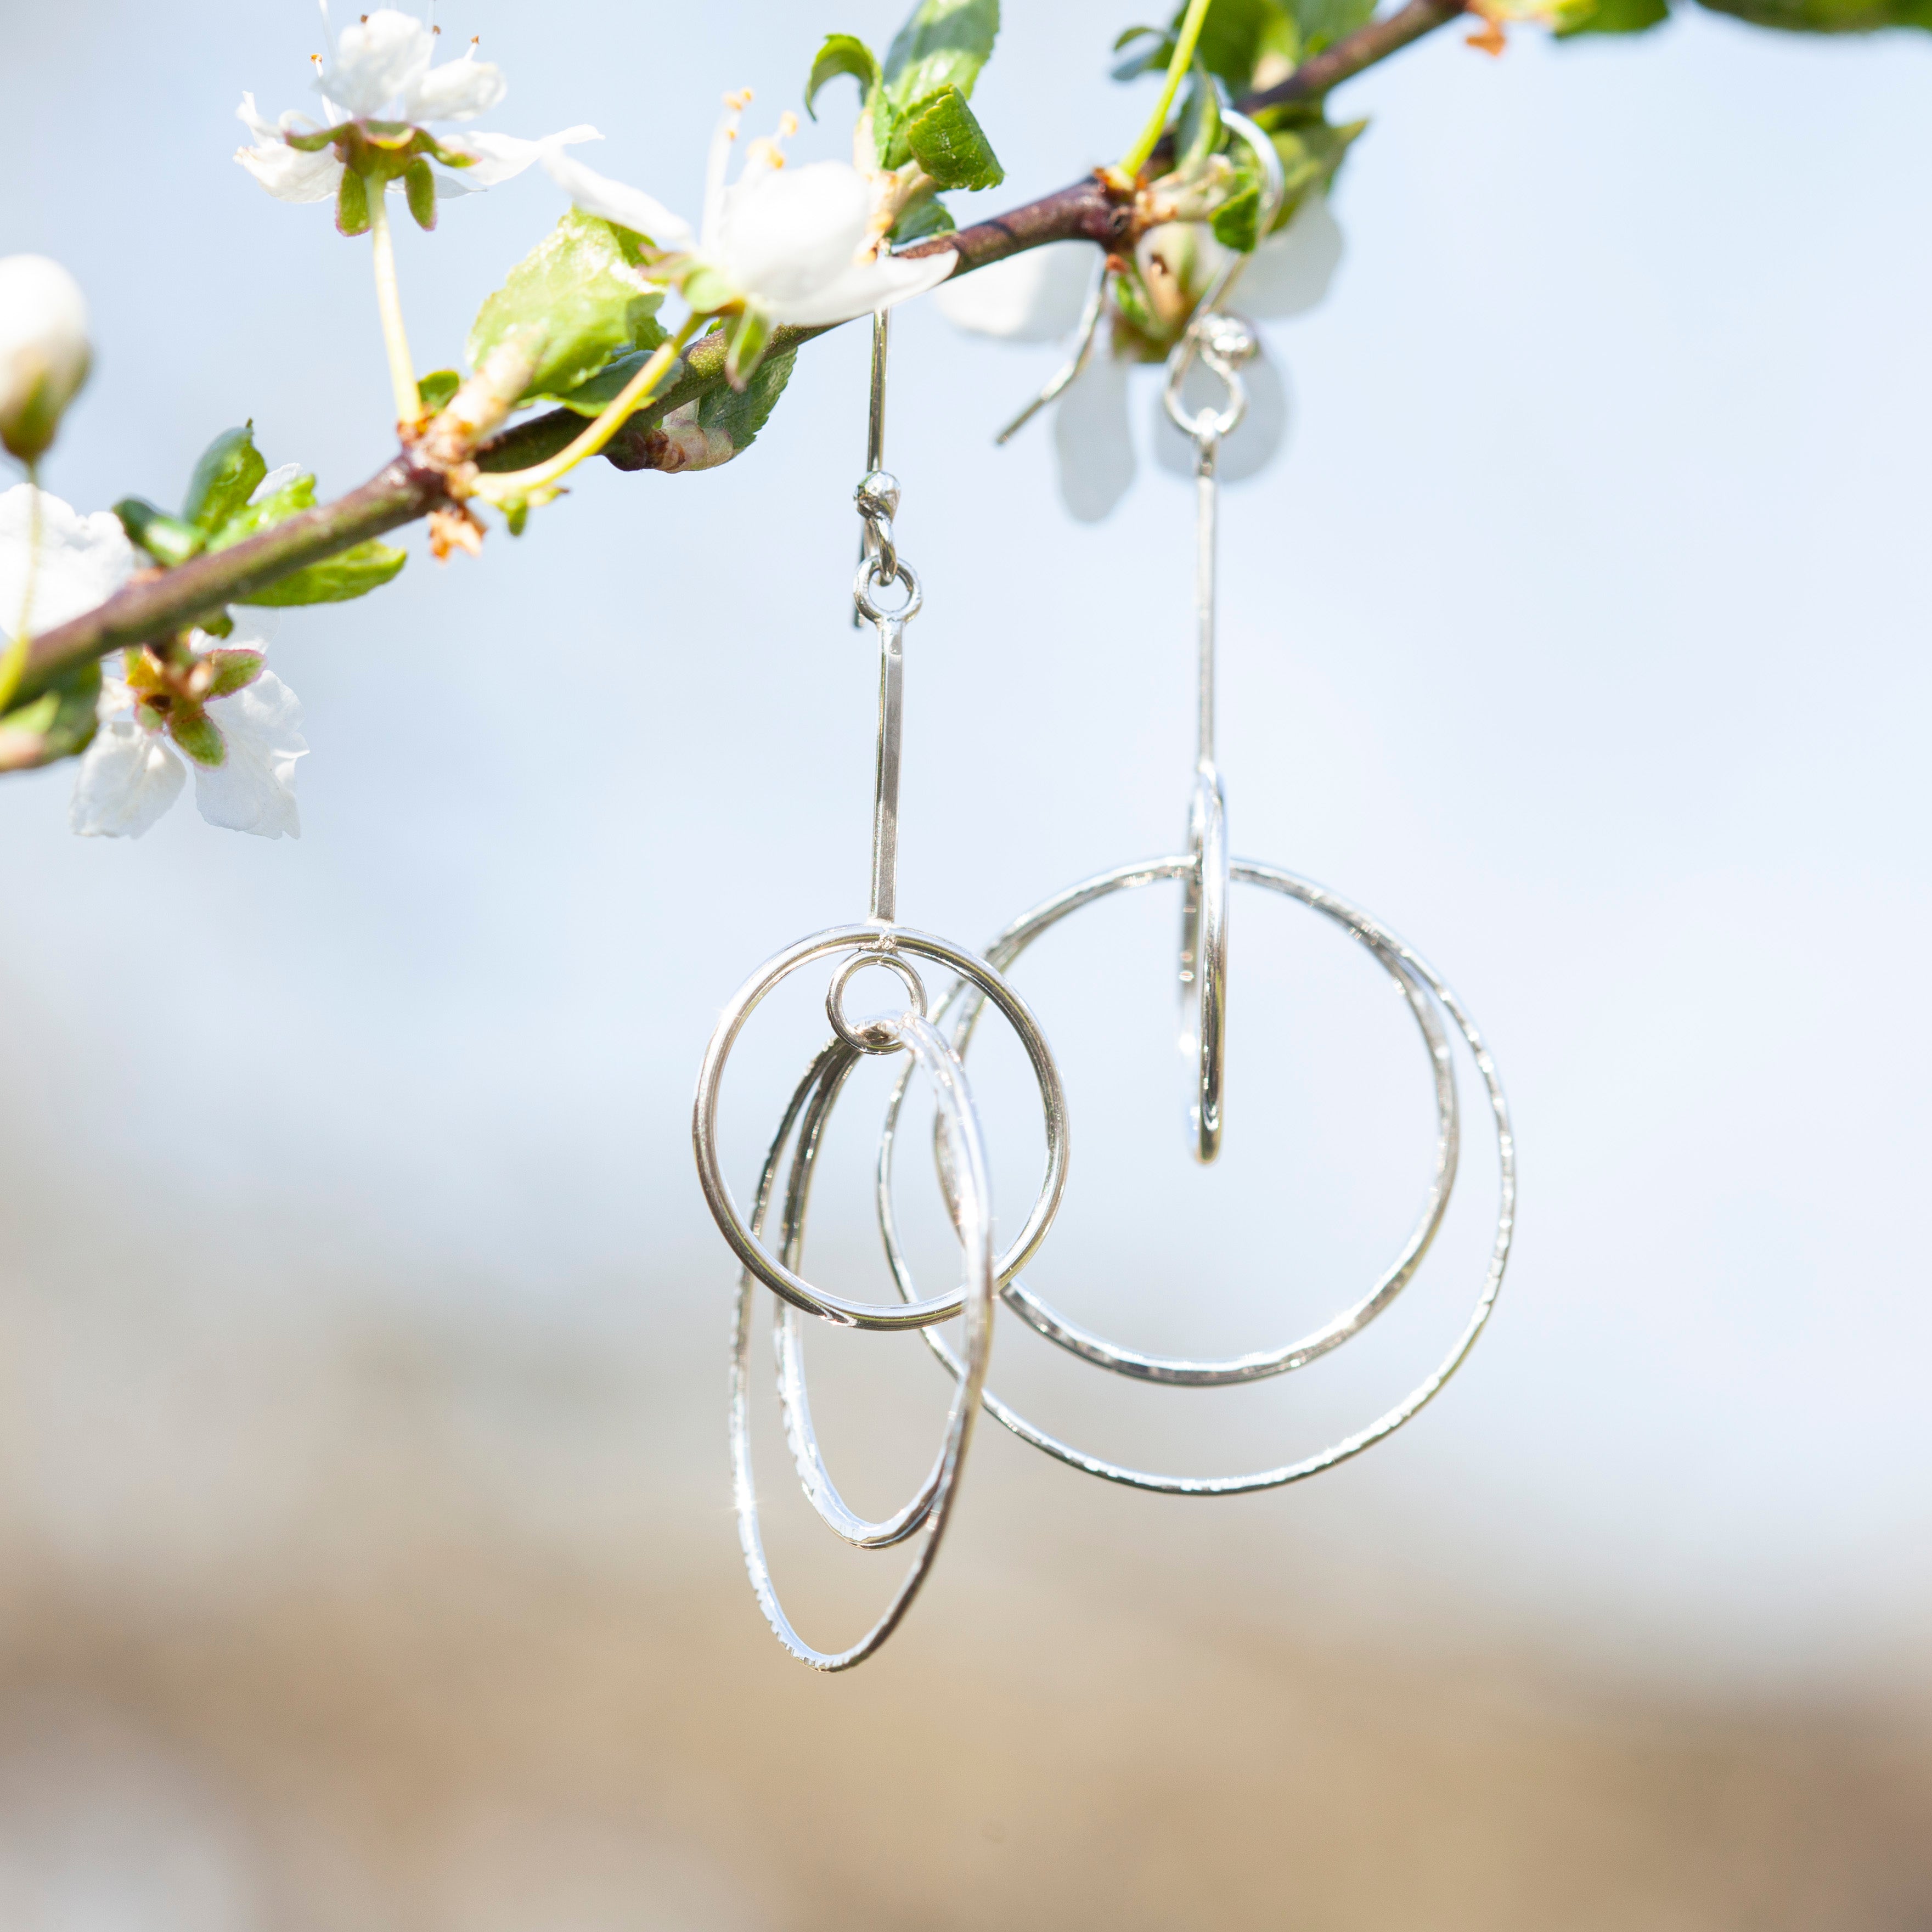 Cosmos earrings in silver     (made to order)